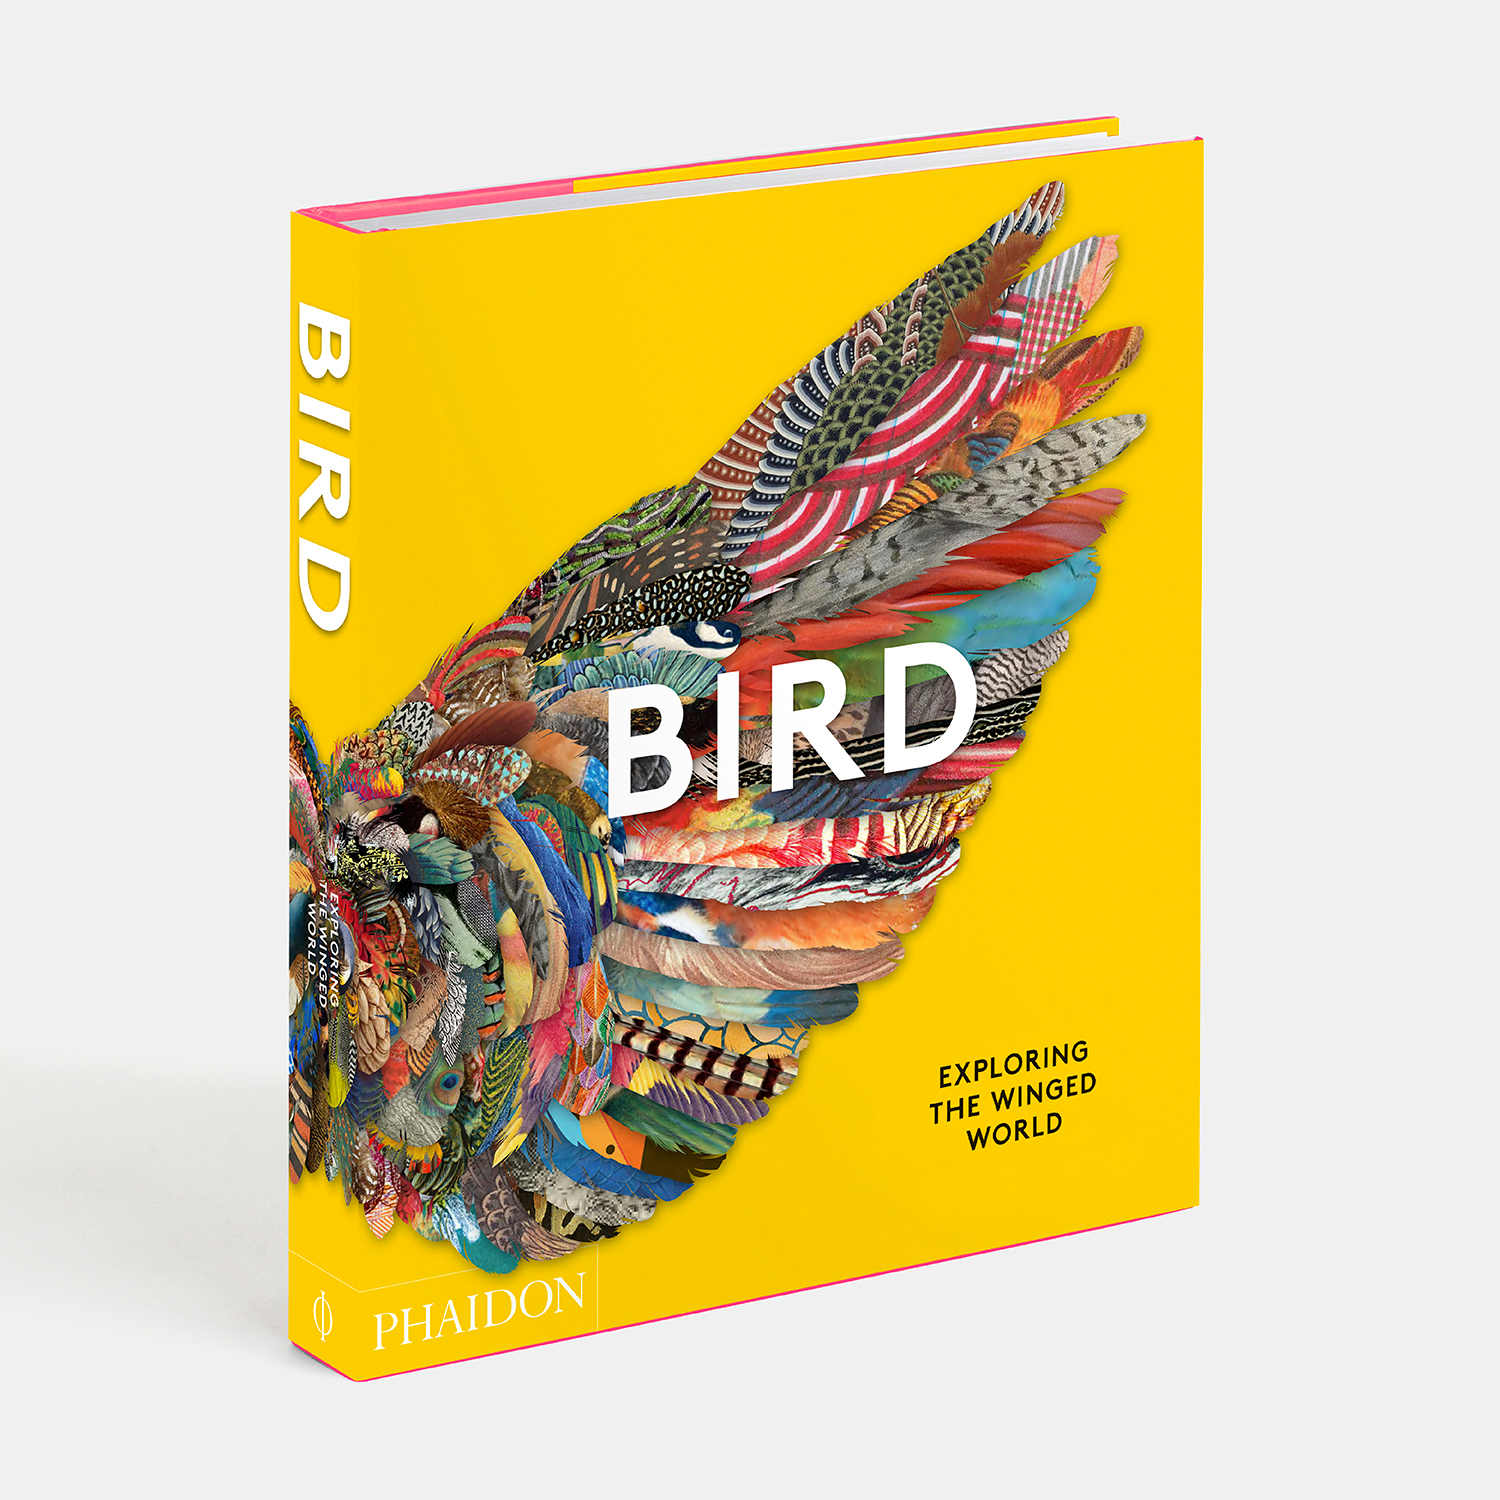 All you need to know about Bird: Exploring the Winged World